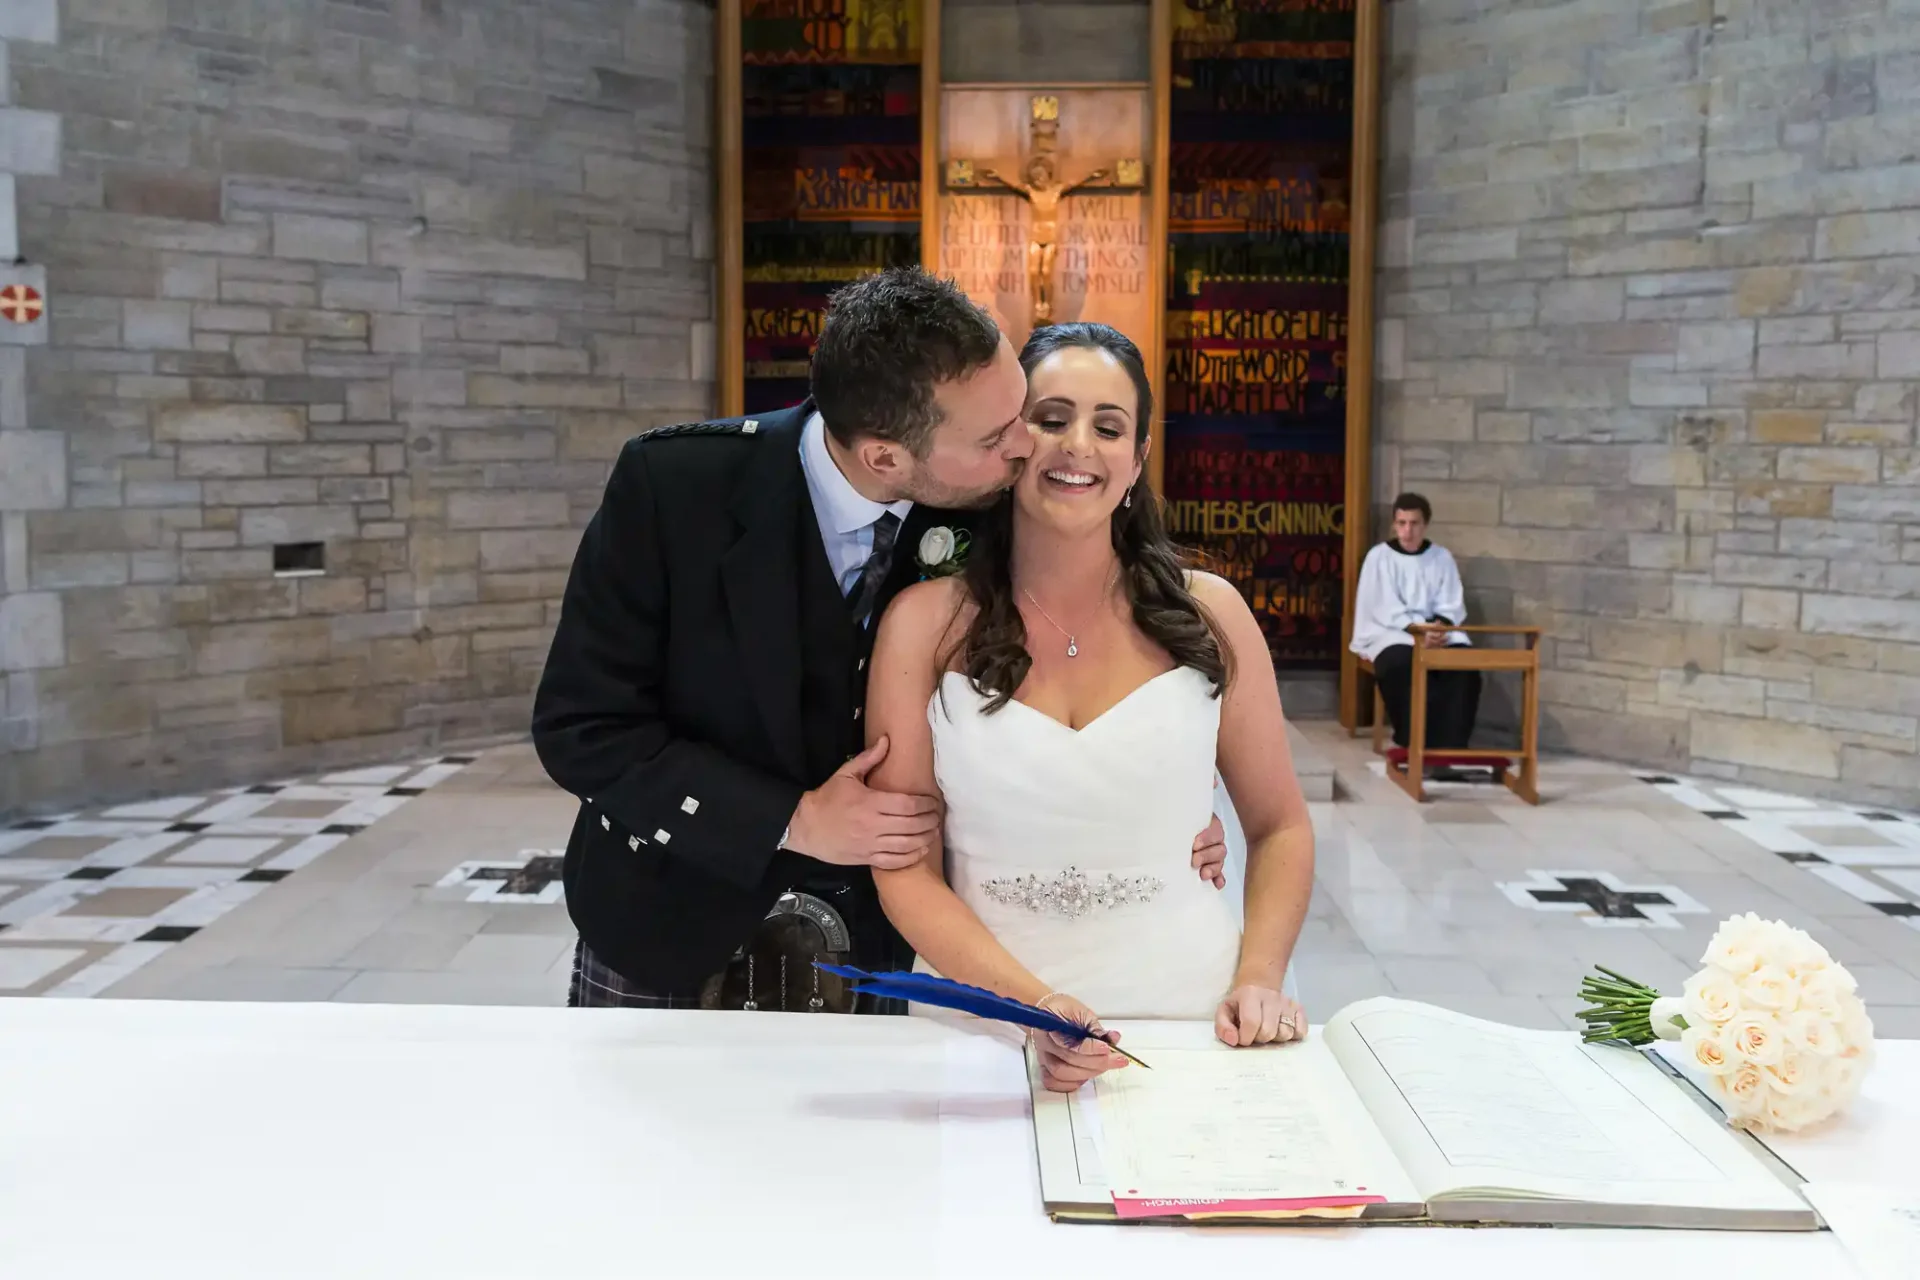 Groom kissing bride on the cheek as she signs a document at a table in a church, with a pianist in the background.